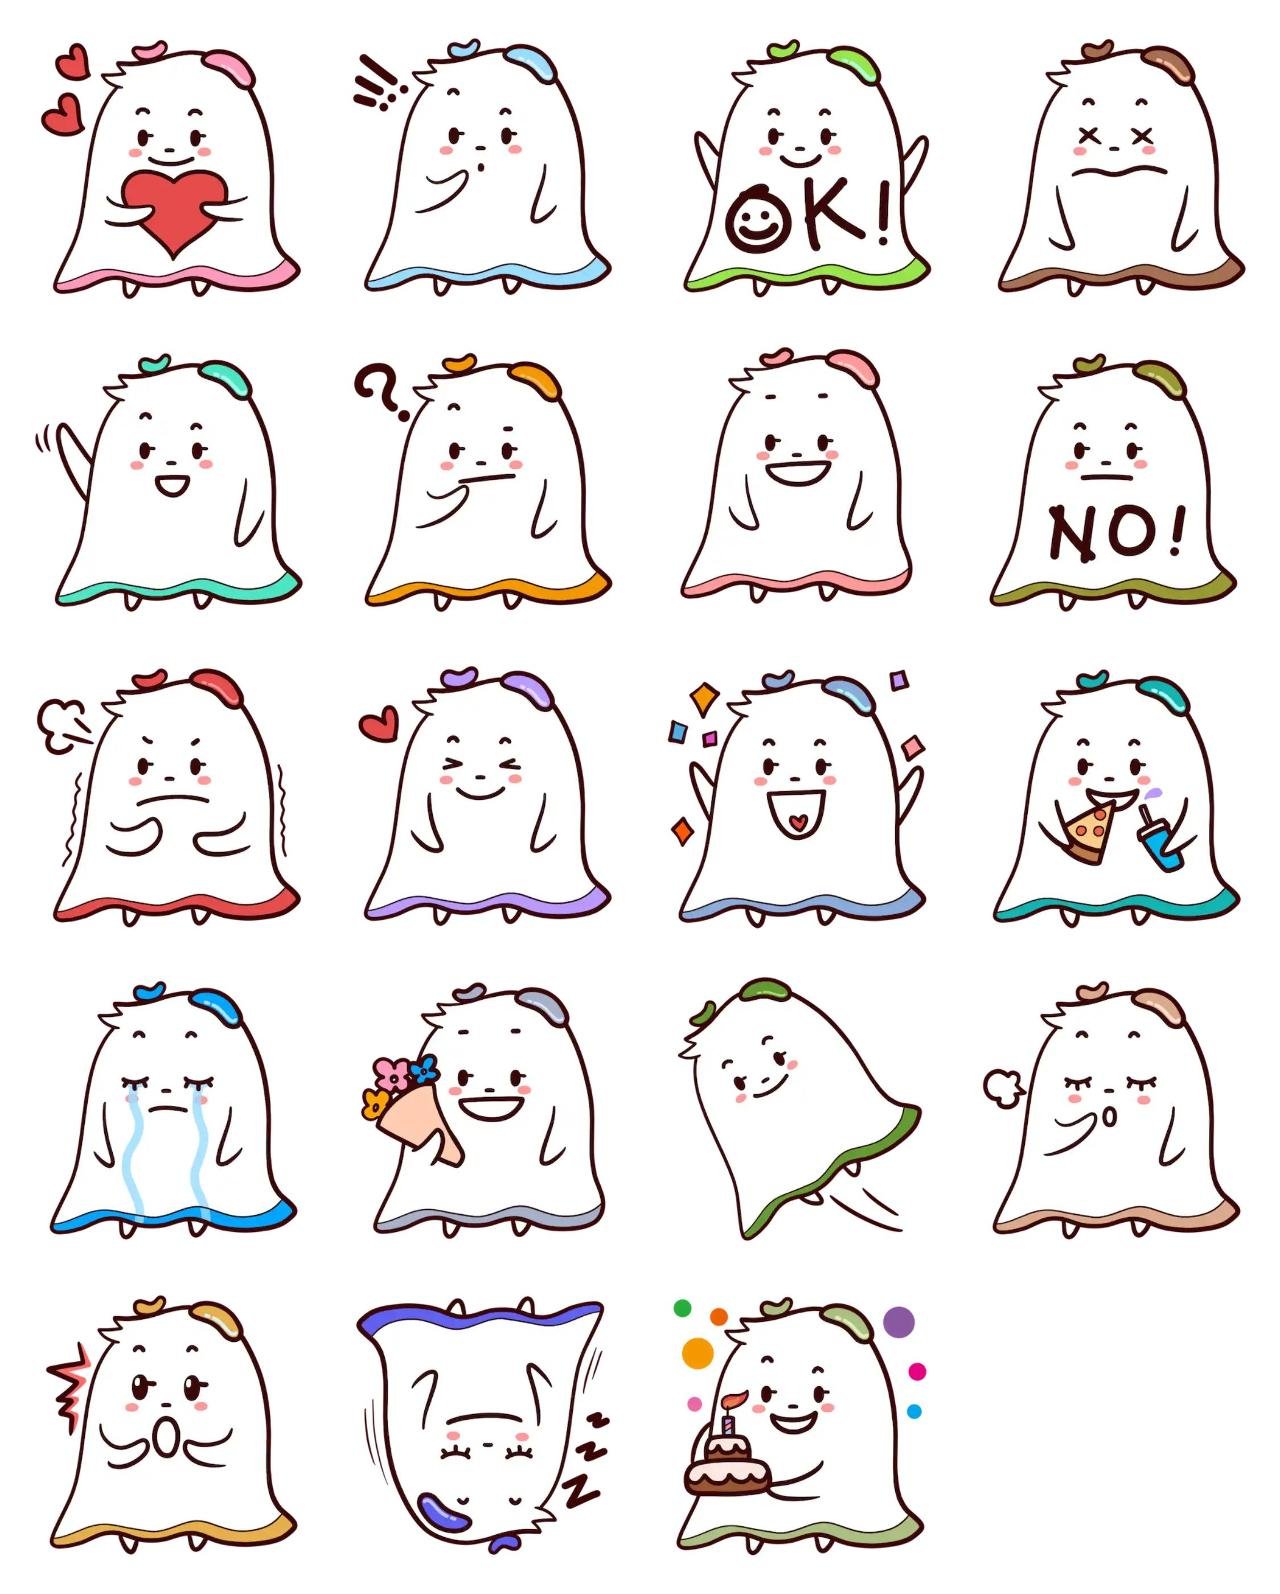 Jelly Bean Ghost Animation/Cartoon,Halloween sticker pack for Whatsapp, Telegram, Signal, and others chatting and message apps